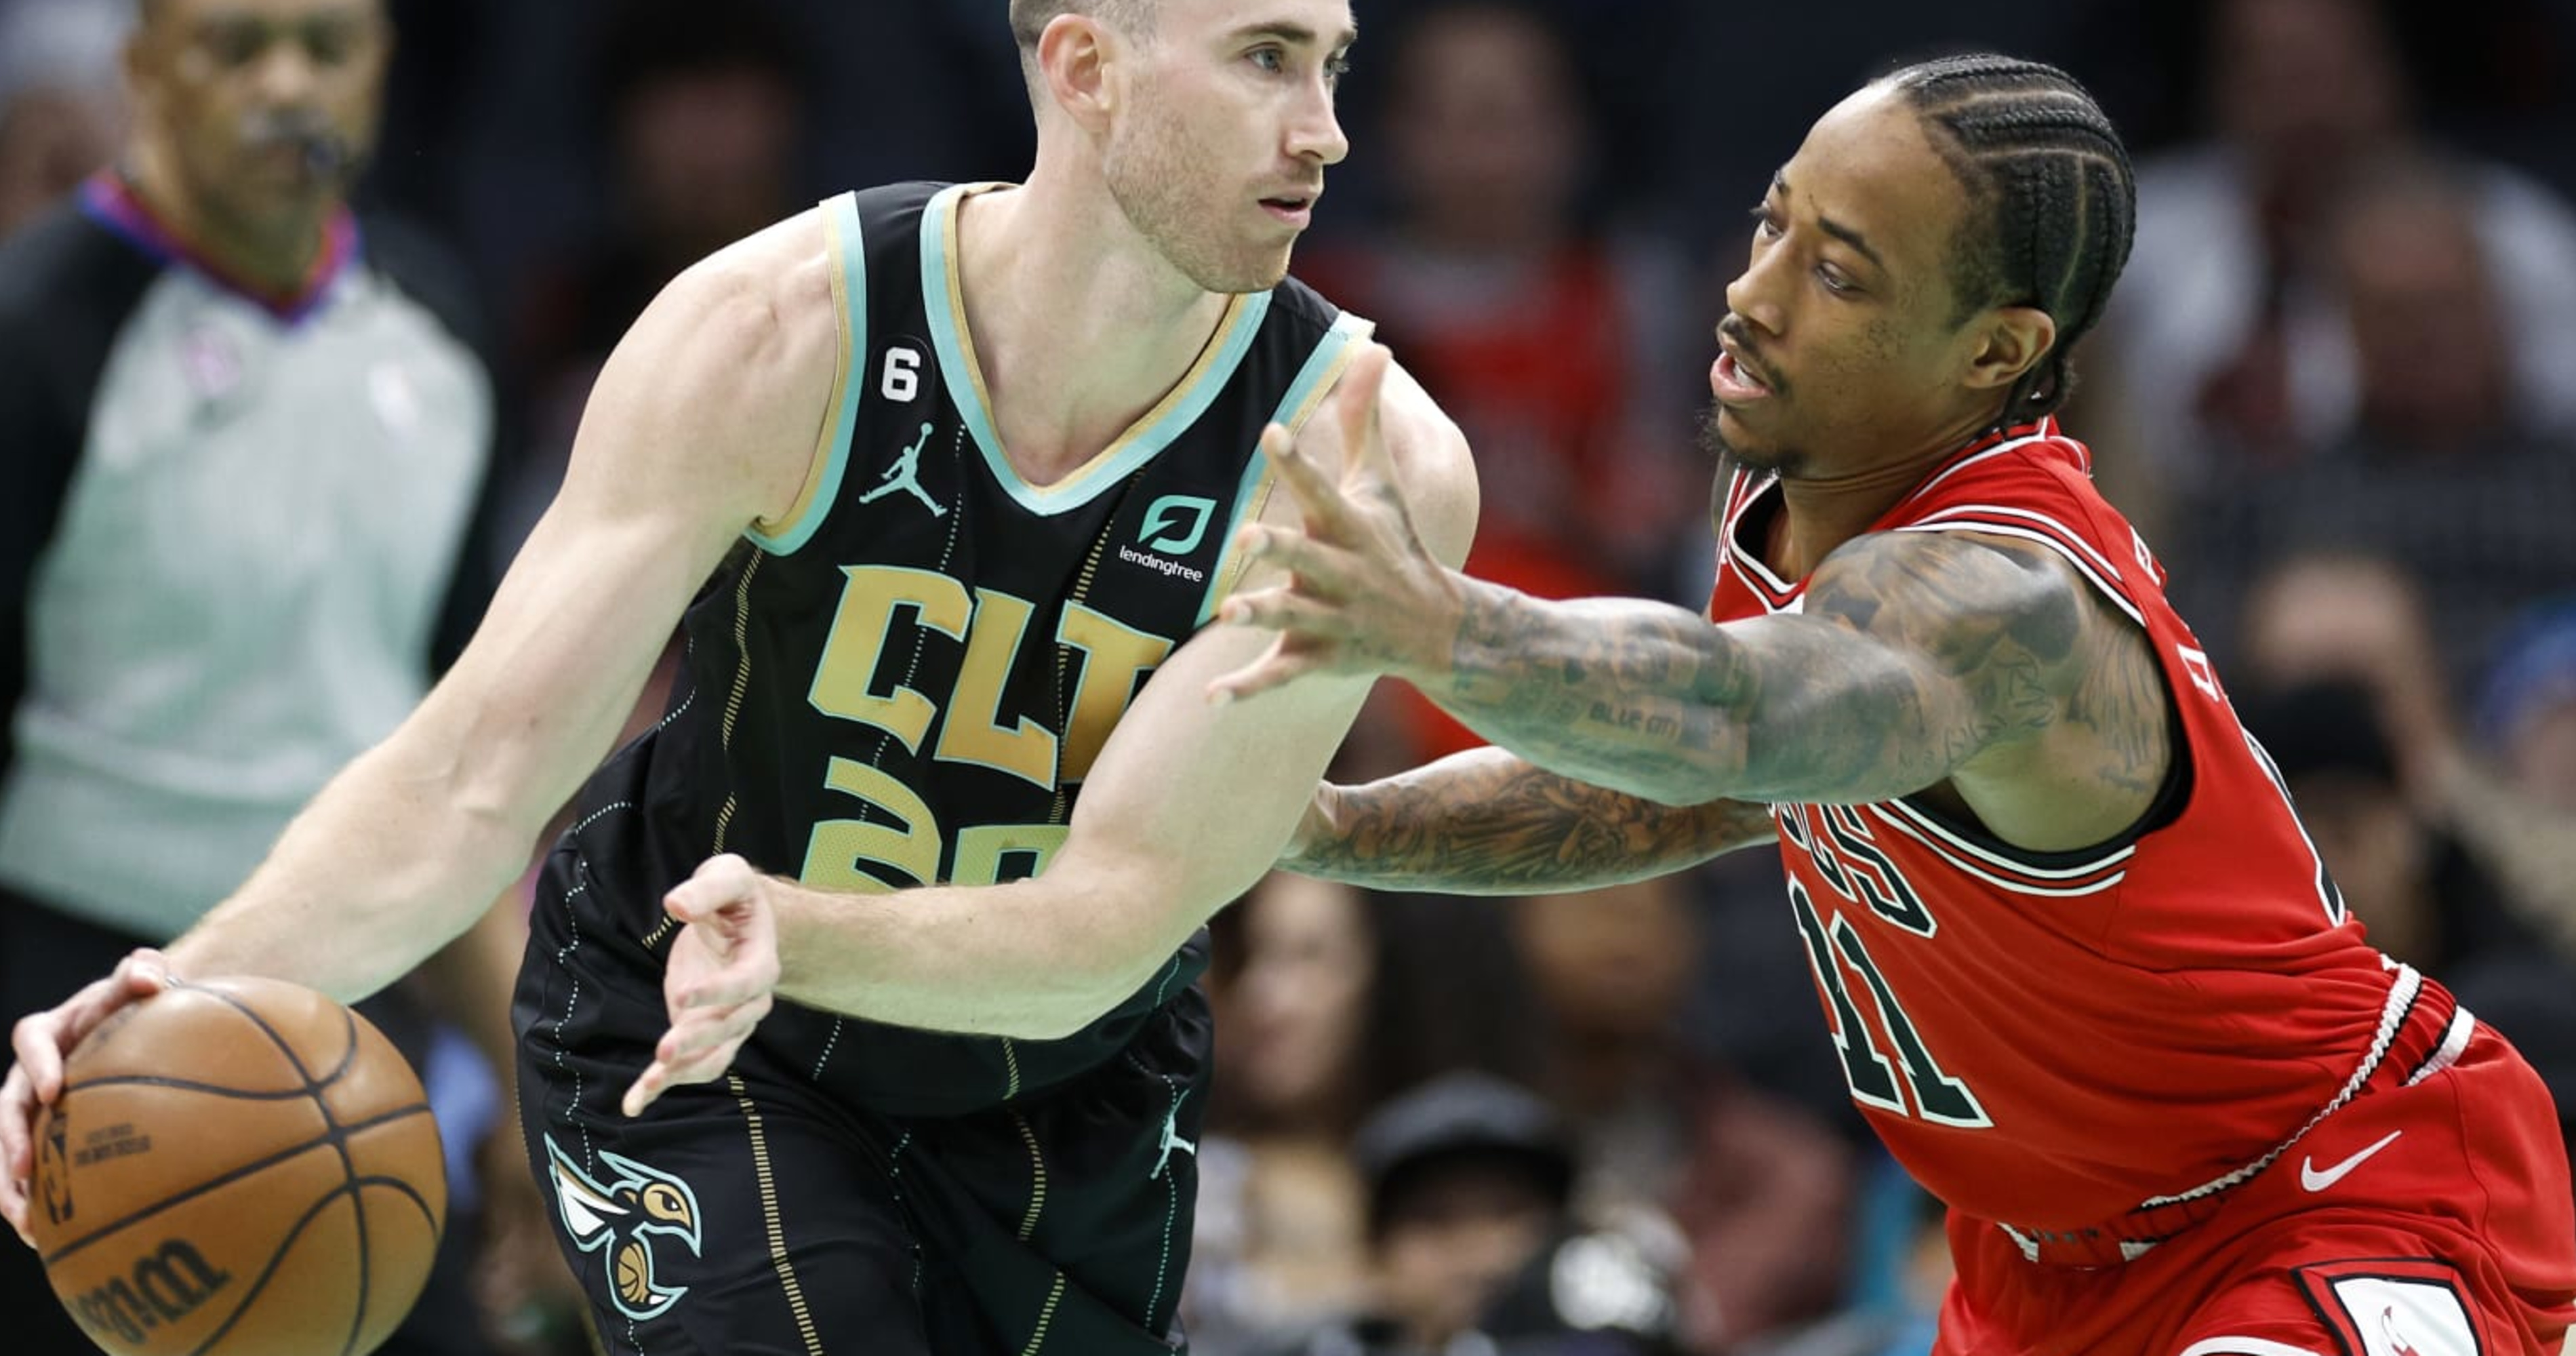 Gordon Hayward likely to pick up option, per report